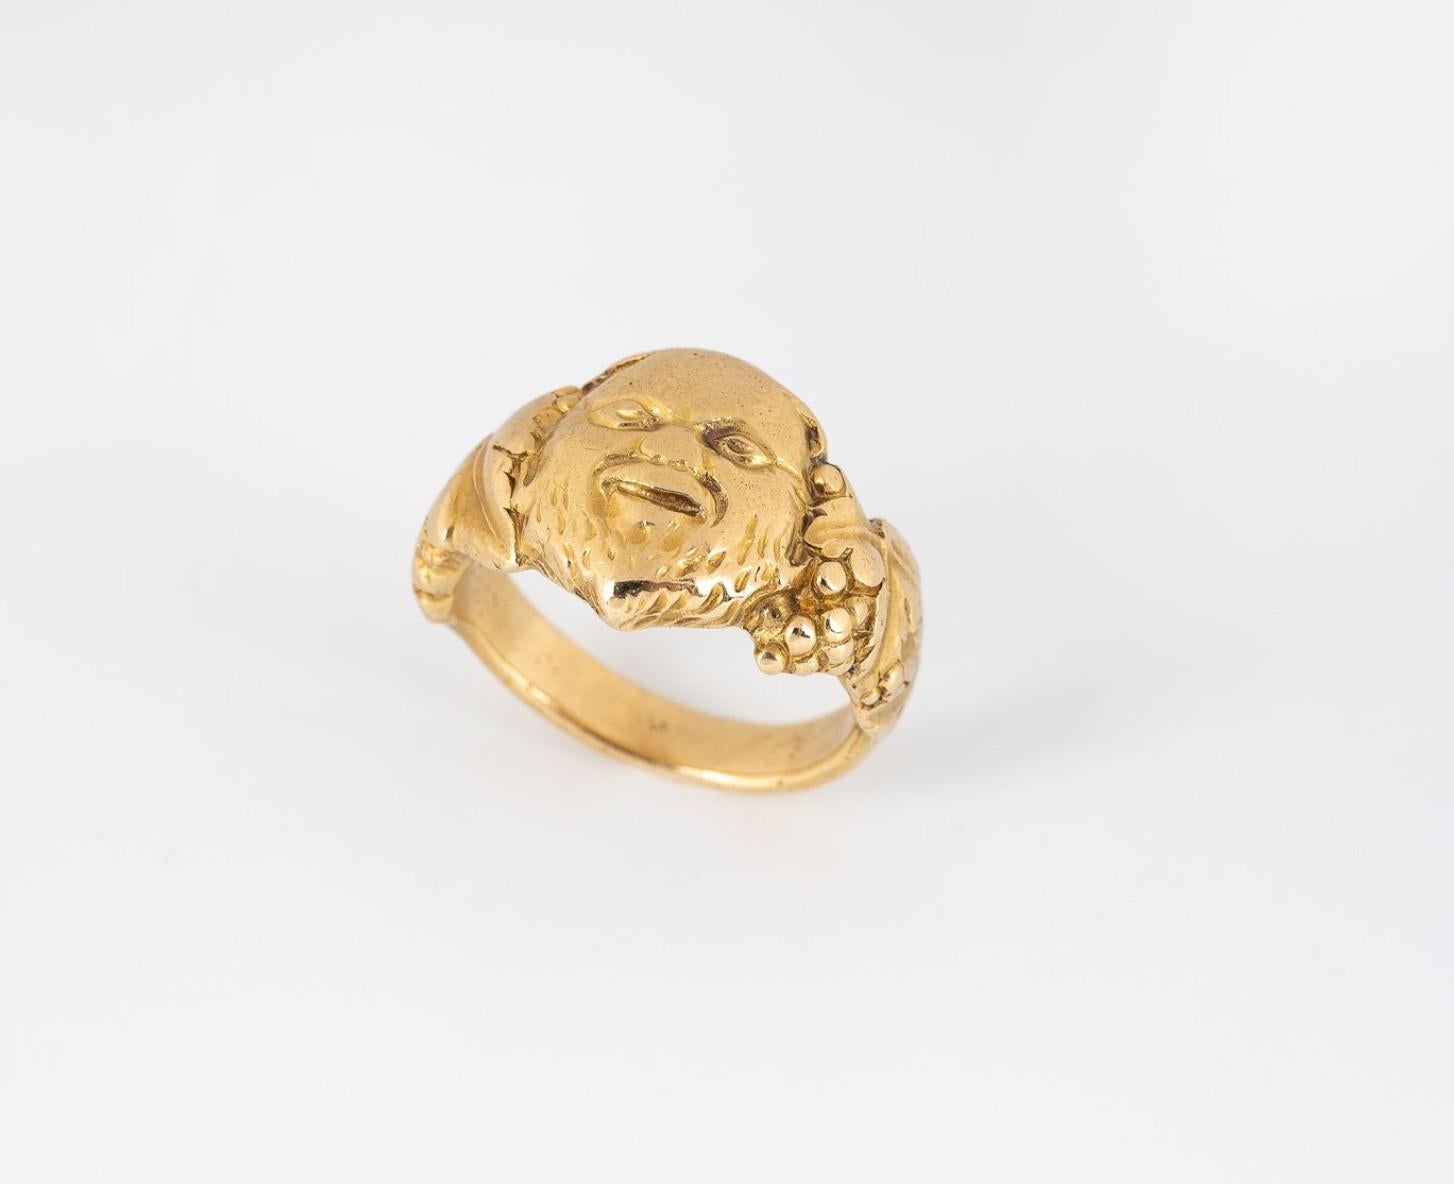 Edouard Aimé Arnould (active 1899/1945)
Chiseled Art Nouveau ring in 18kt gold adorned with a bacchus supported by vines. Size 7 1/4
Weight: 12.17g.
Edouard Aimé Arnould (active 1899/1945) was an award-winning French jeweler know for his Art Nouveau